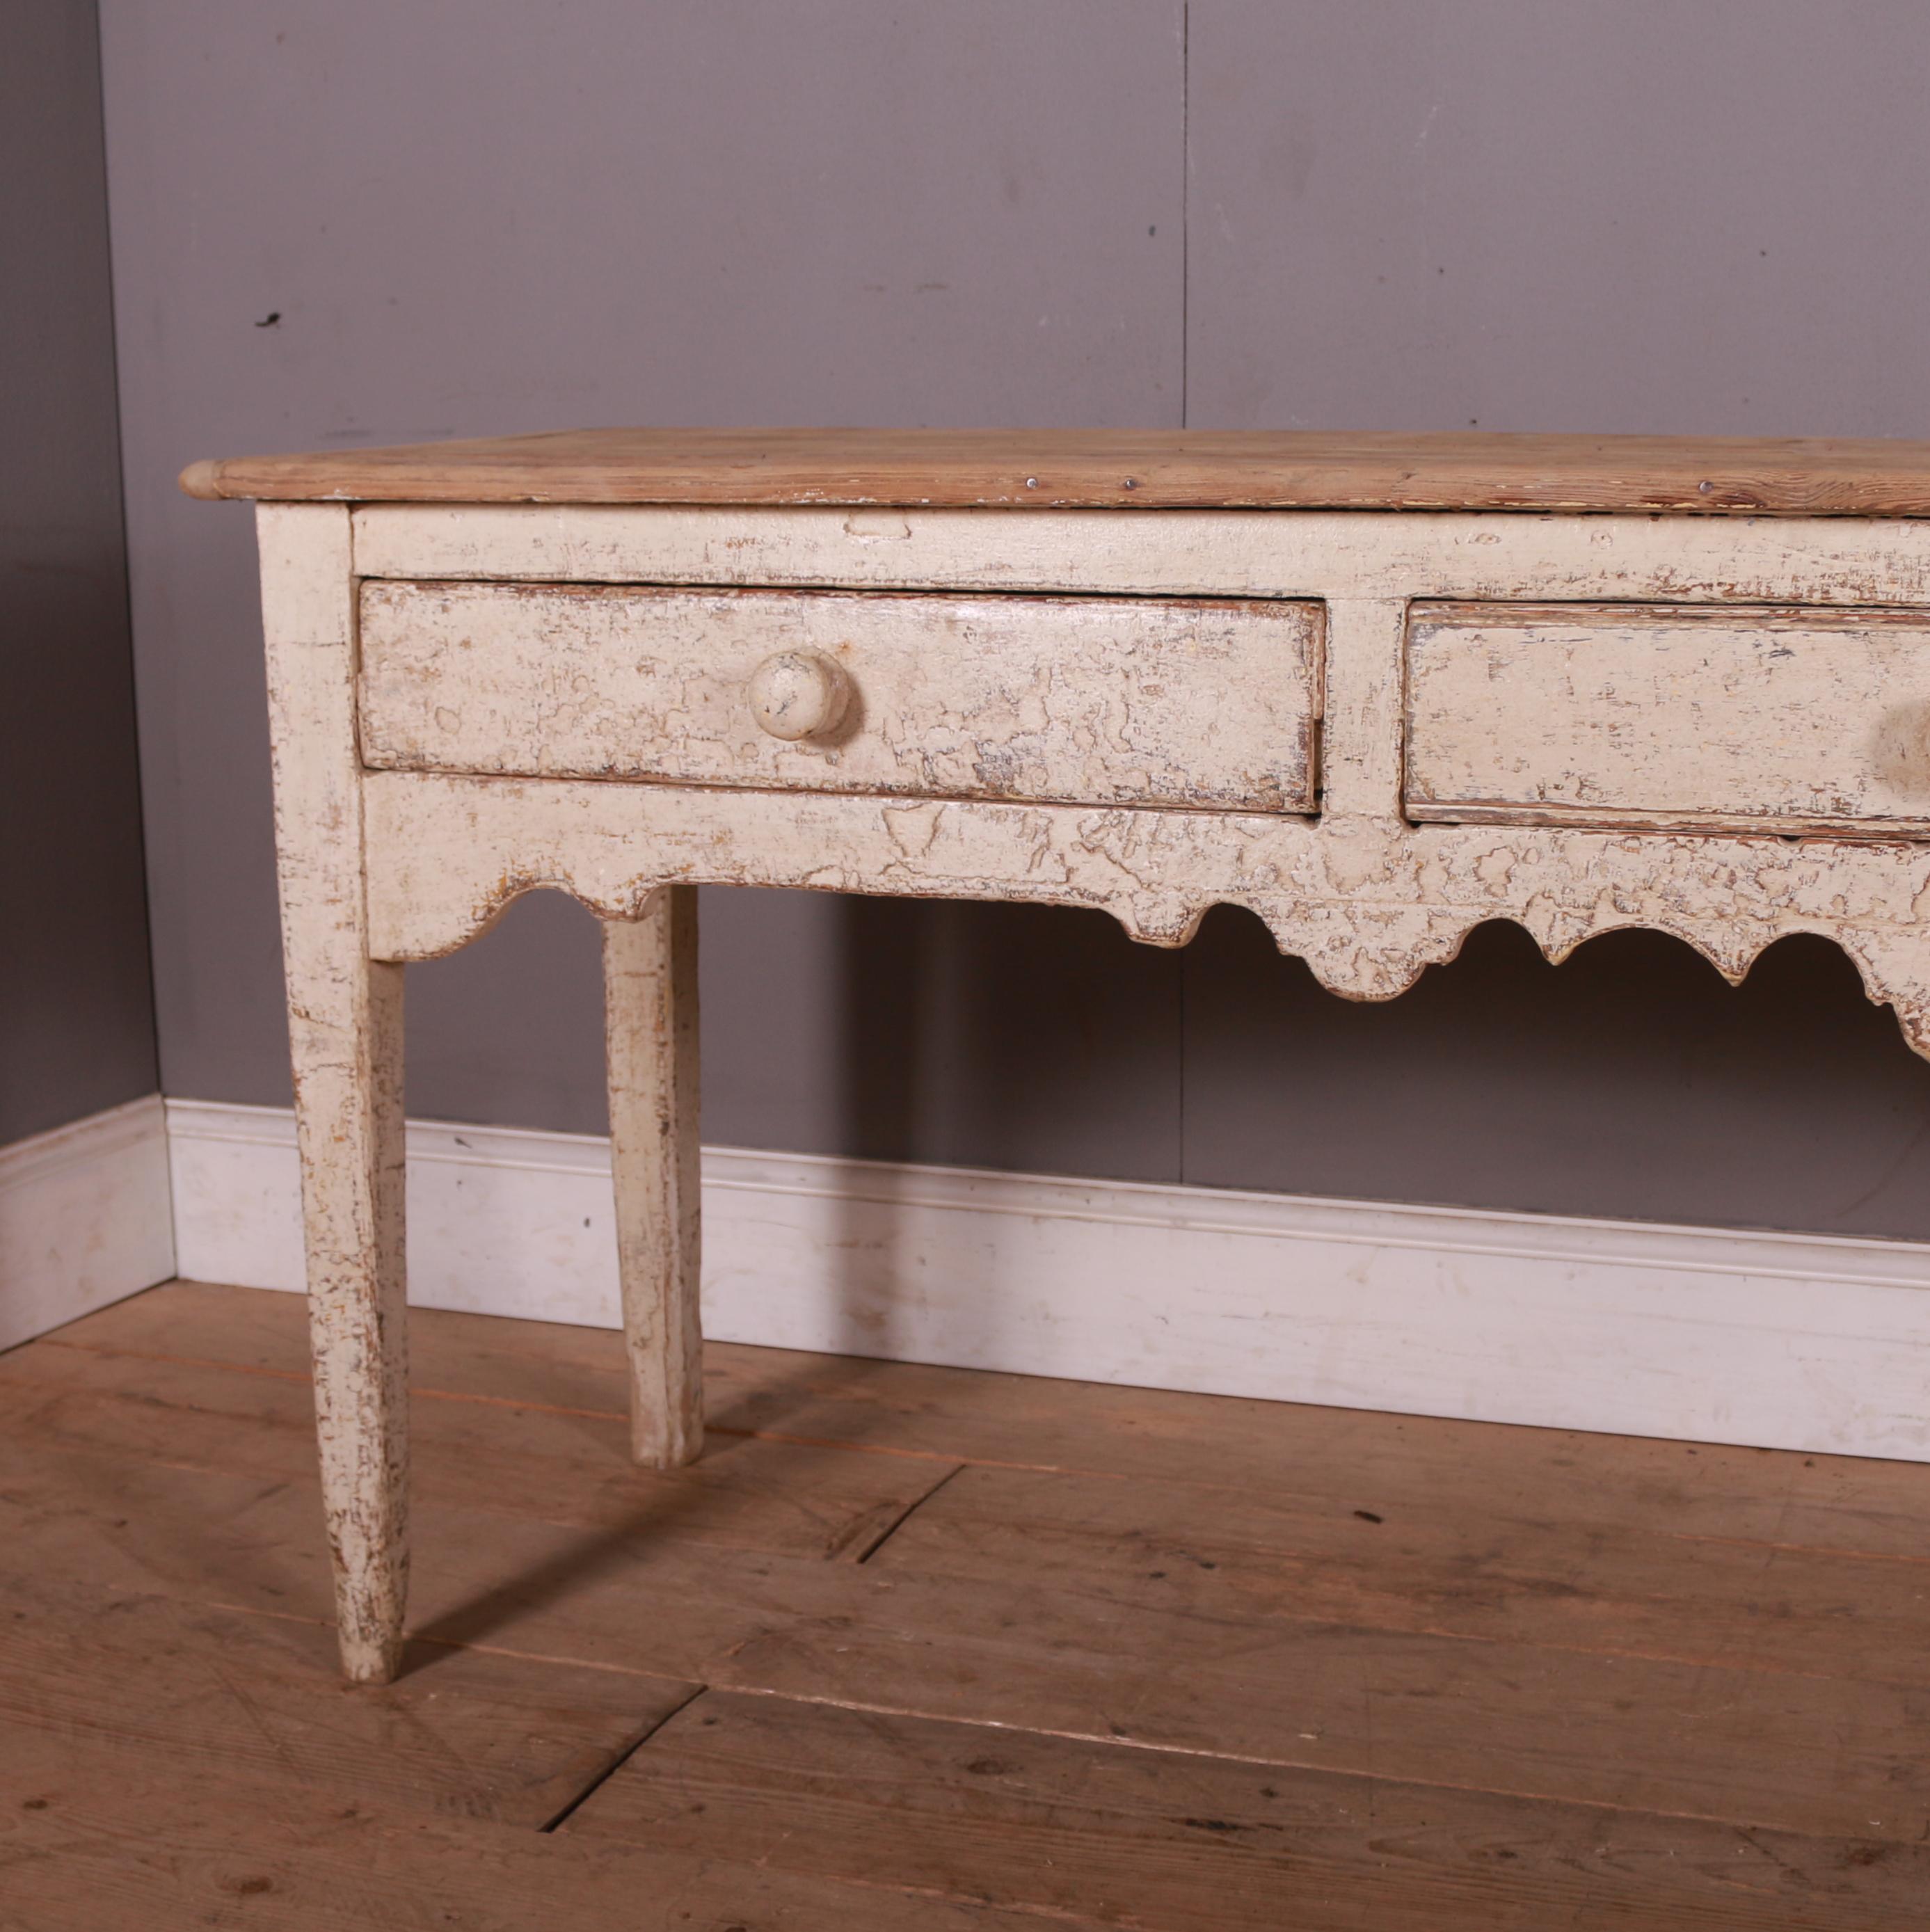 Good early 19th C English 3 drawer pine dresser base with a rustic scrubbed top. 1820.

Reference: 7334

Dimensions
82 inches (208 cms) wide
20 inches (51 cms) deep
30.5 inches (77 cms) high.